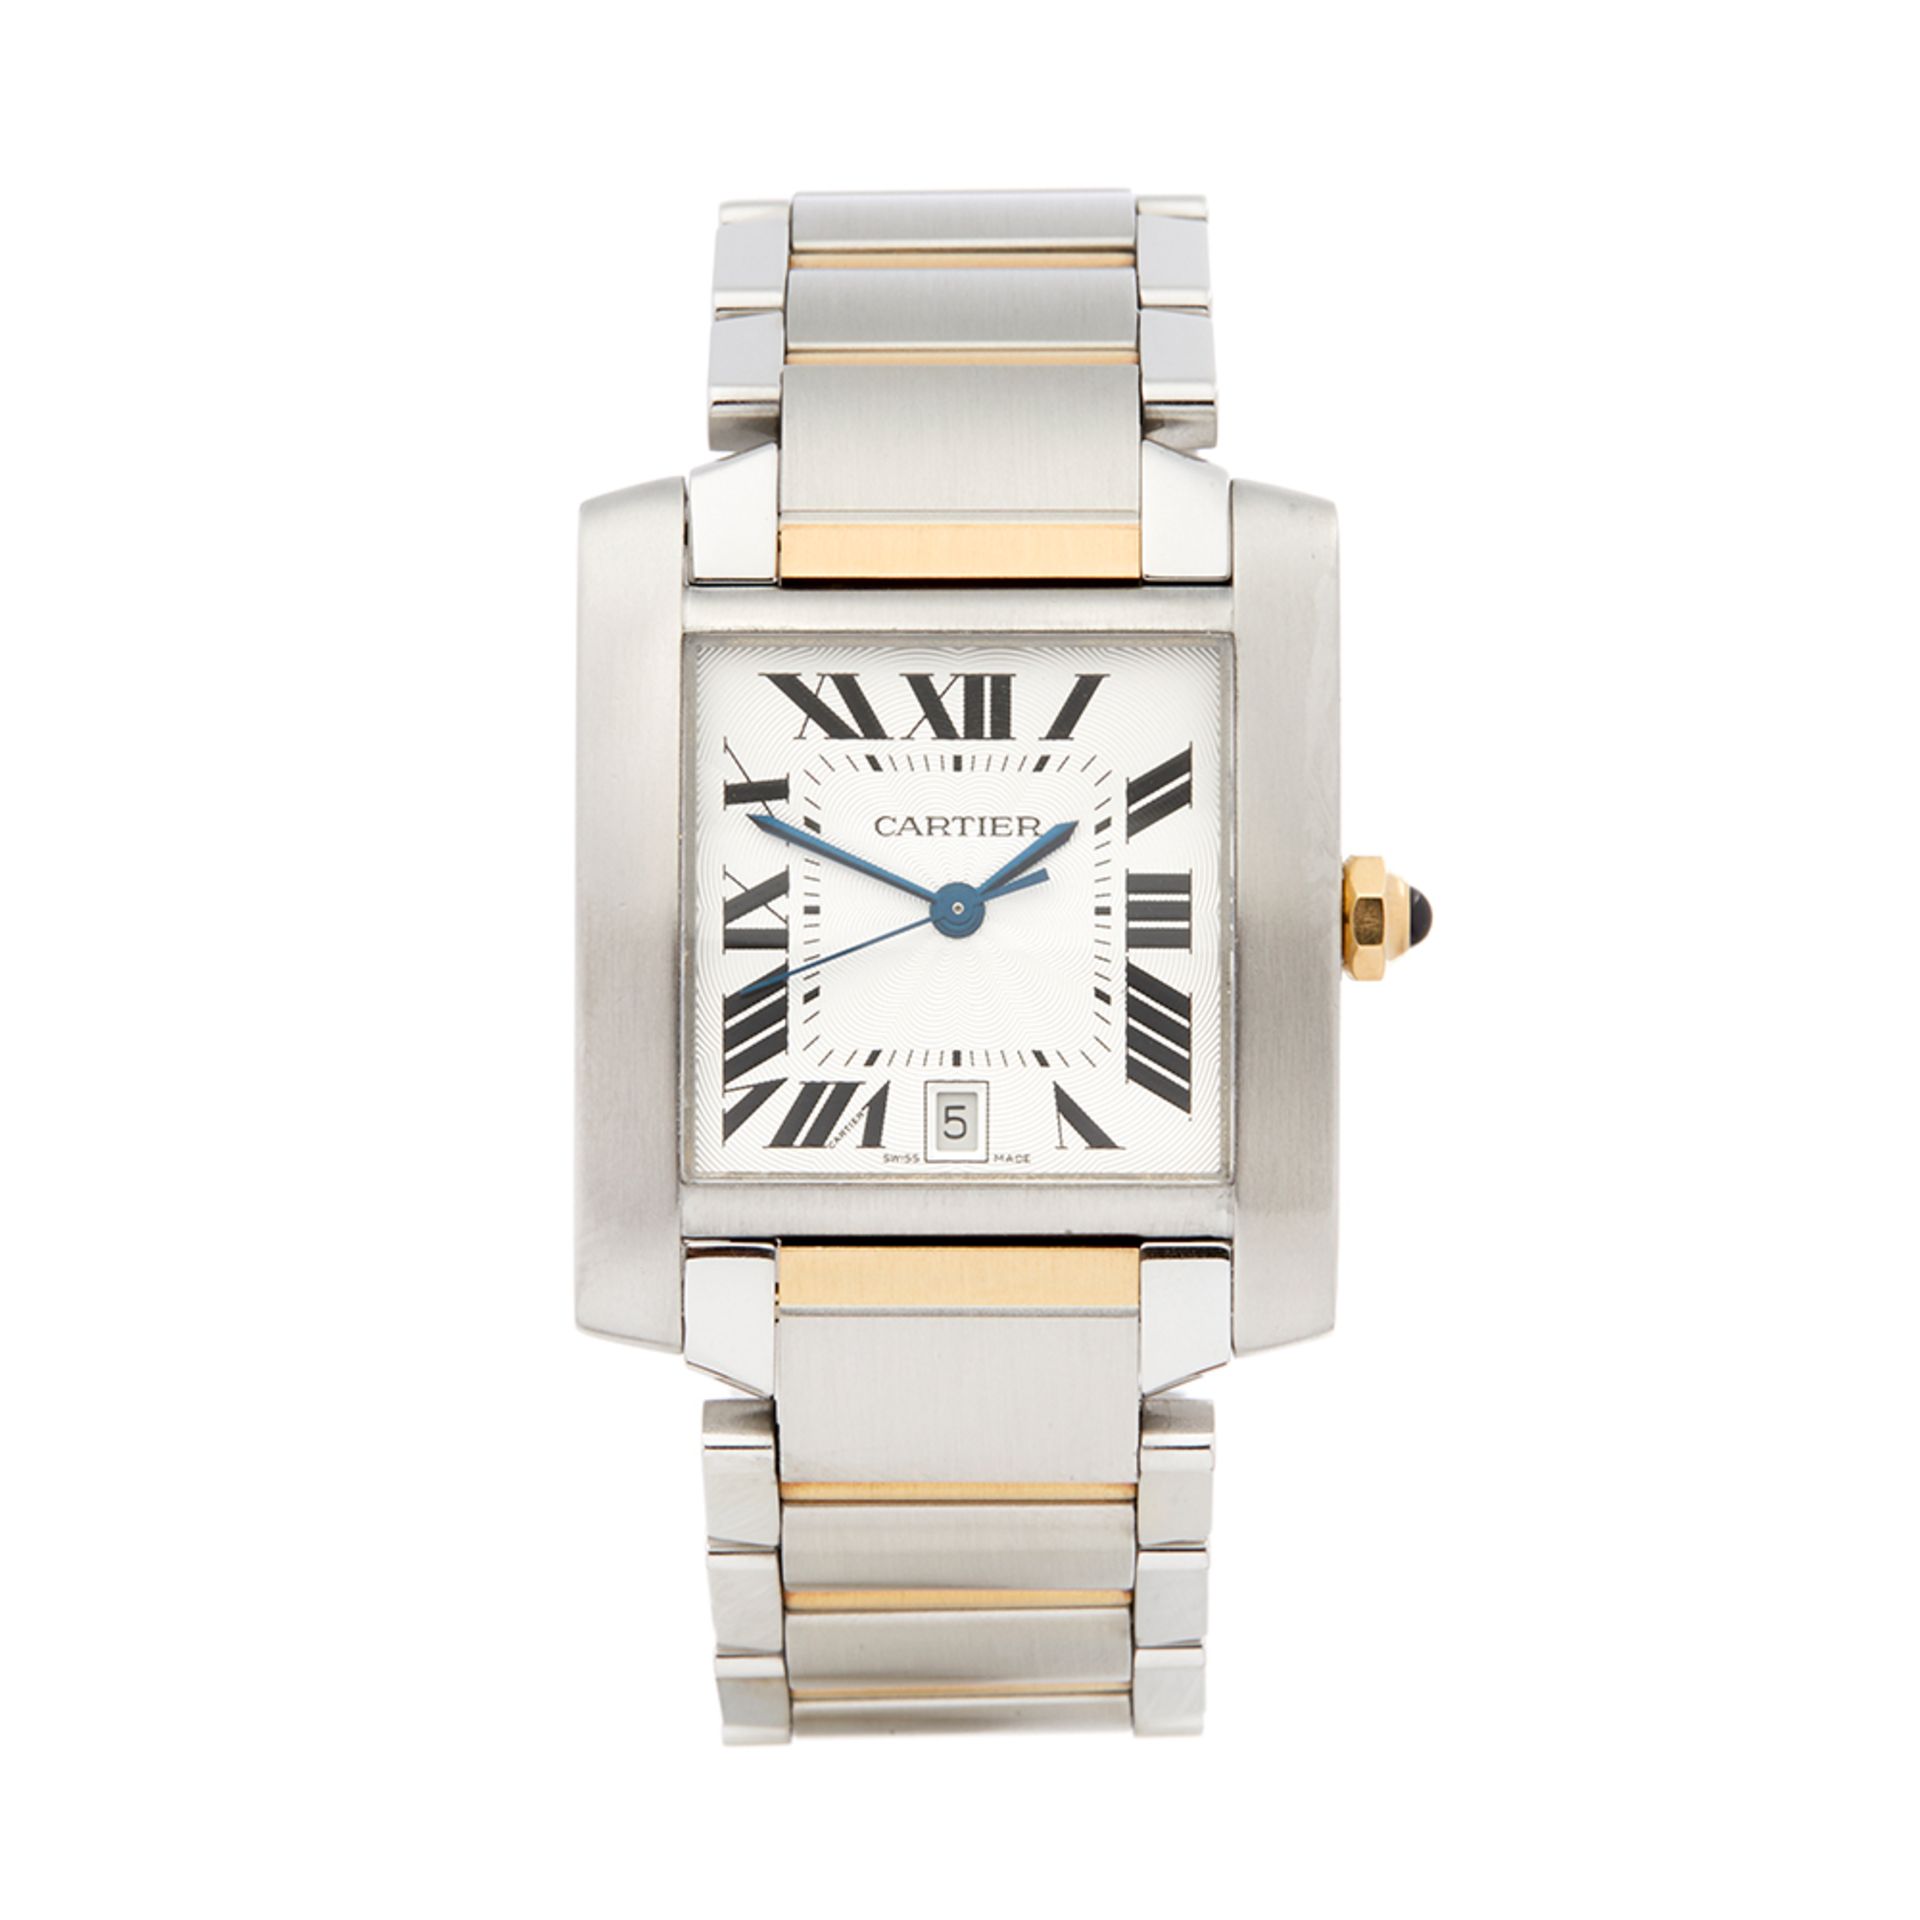 Cartier Tank Francaise Stainless Steel & 18K Yellow Gold - W51005Q4 - Image 2 of 8